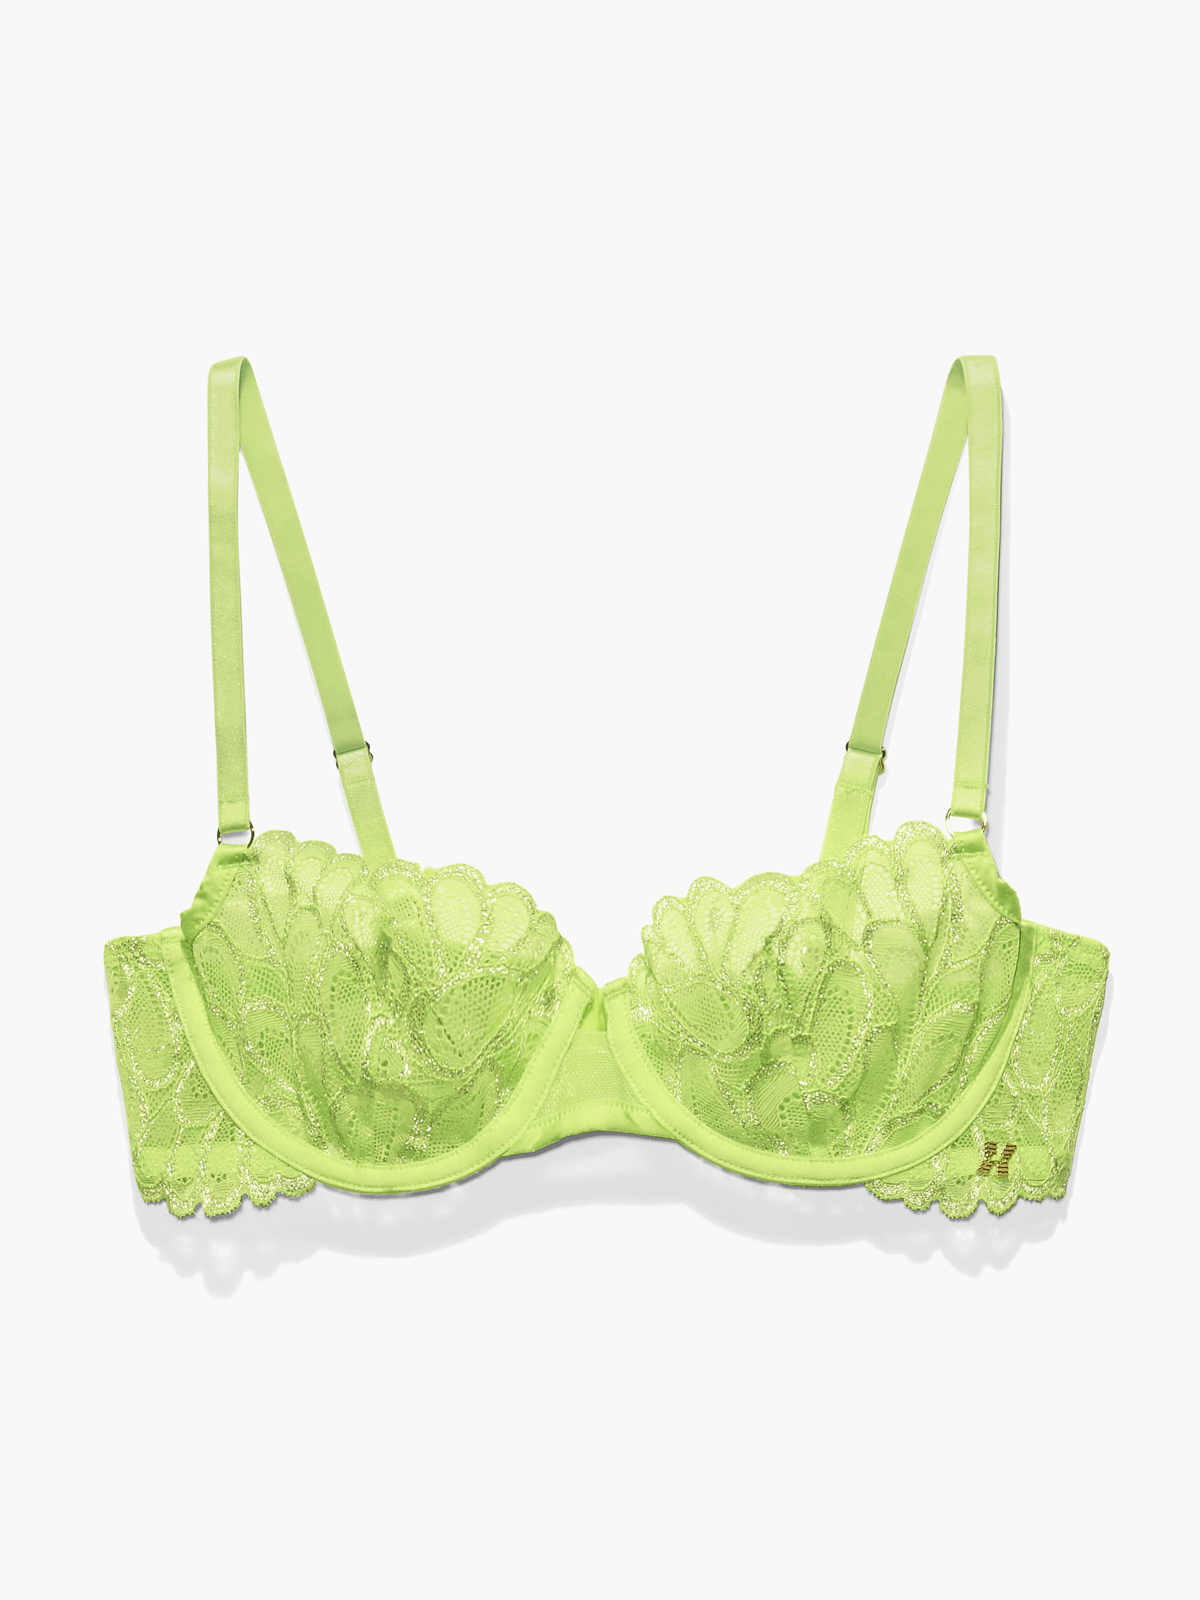 Savagexfenty Tagged by Savage Unlined Bra - “Kelly Green” color in 34B Green  Size 34 B - $35 (30% Off Retail) New With Tags - From Tina